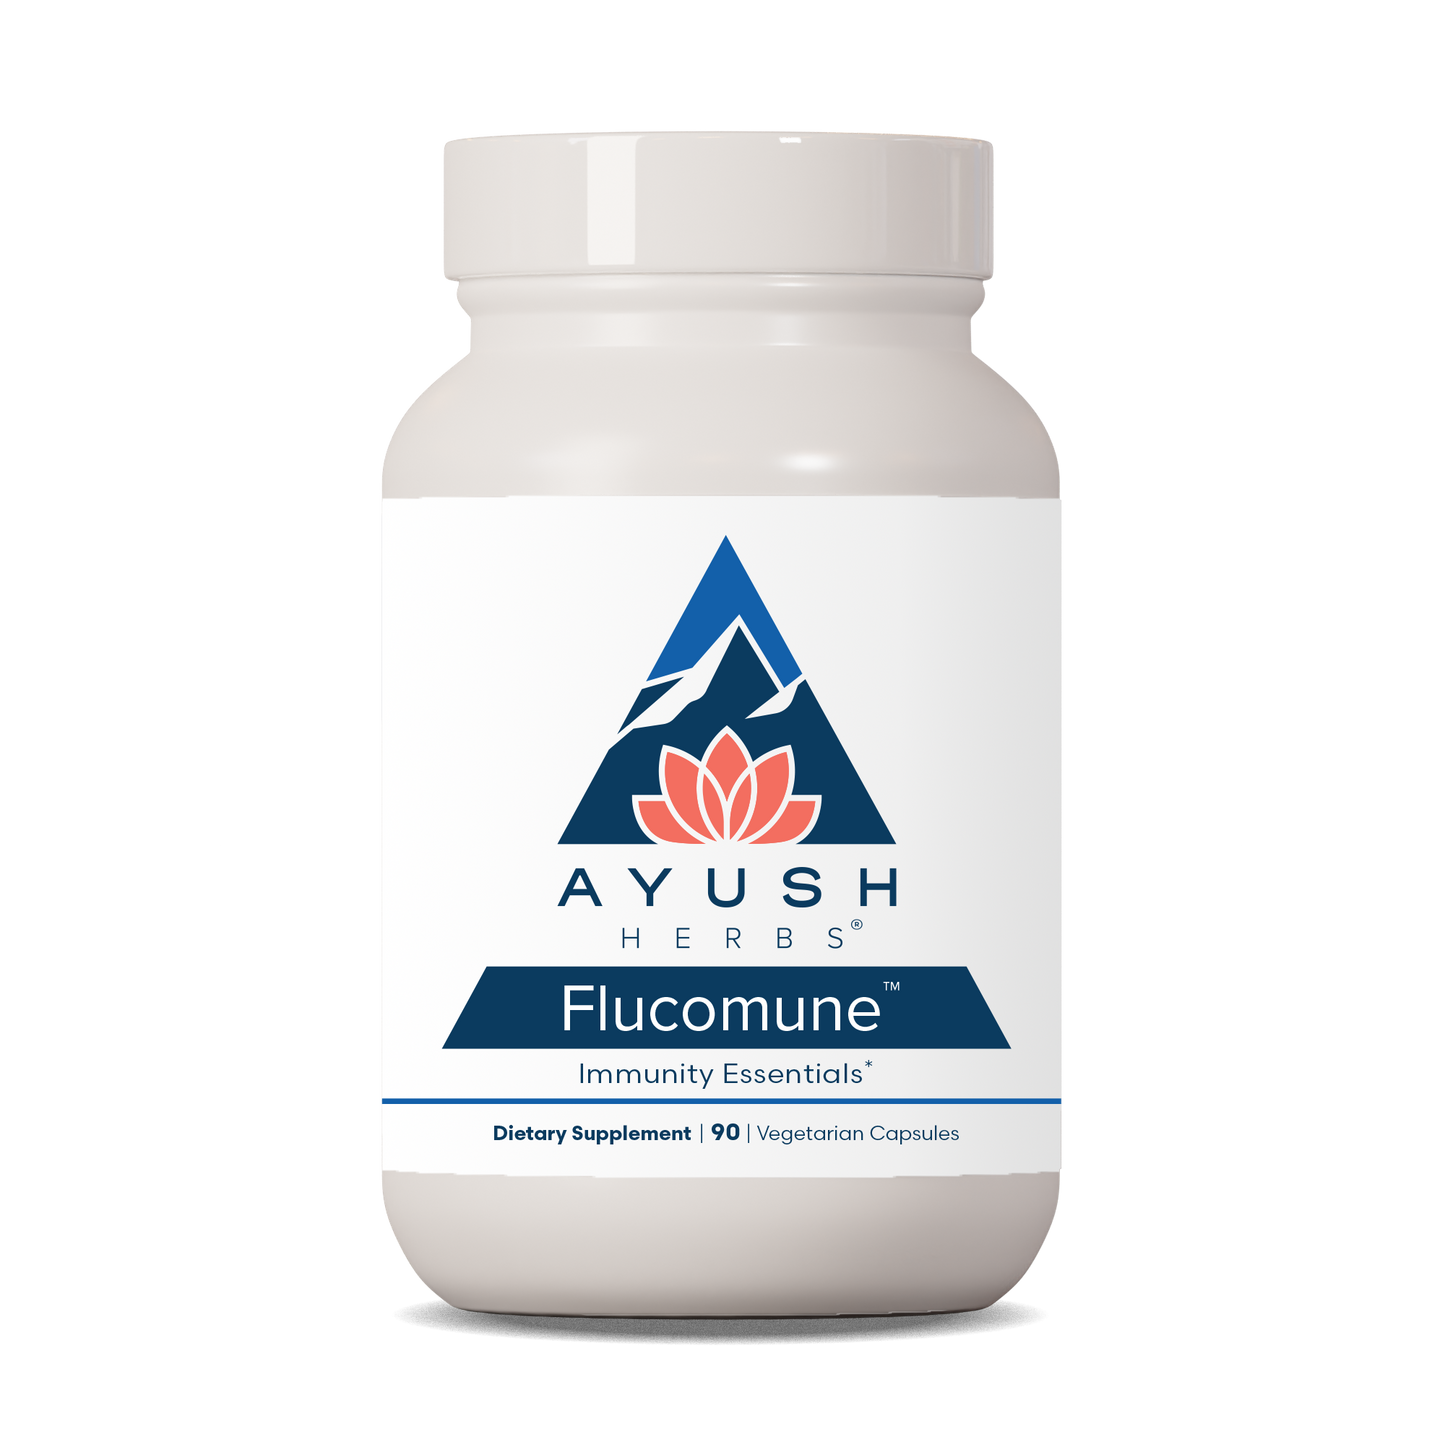 Flucomune Bottle front by Ayush herbs herbal supplements